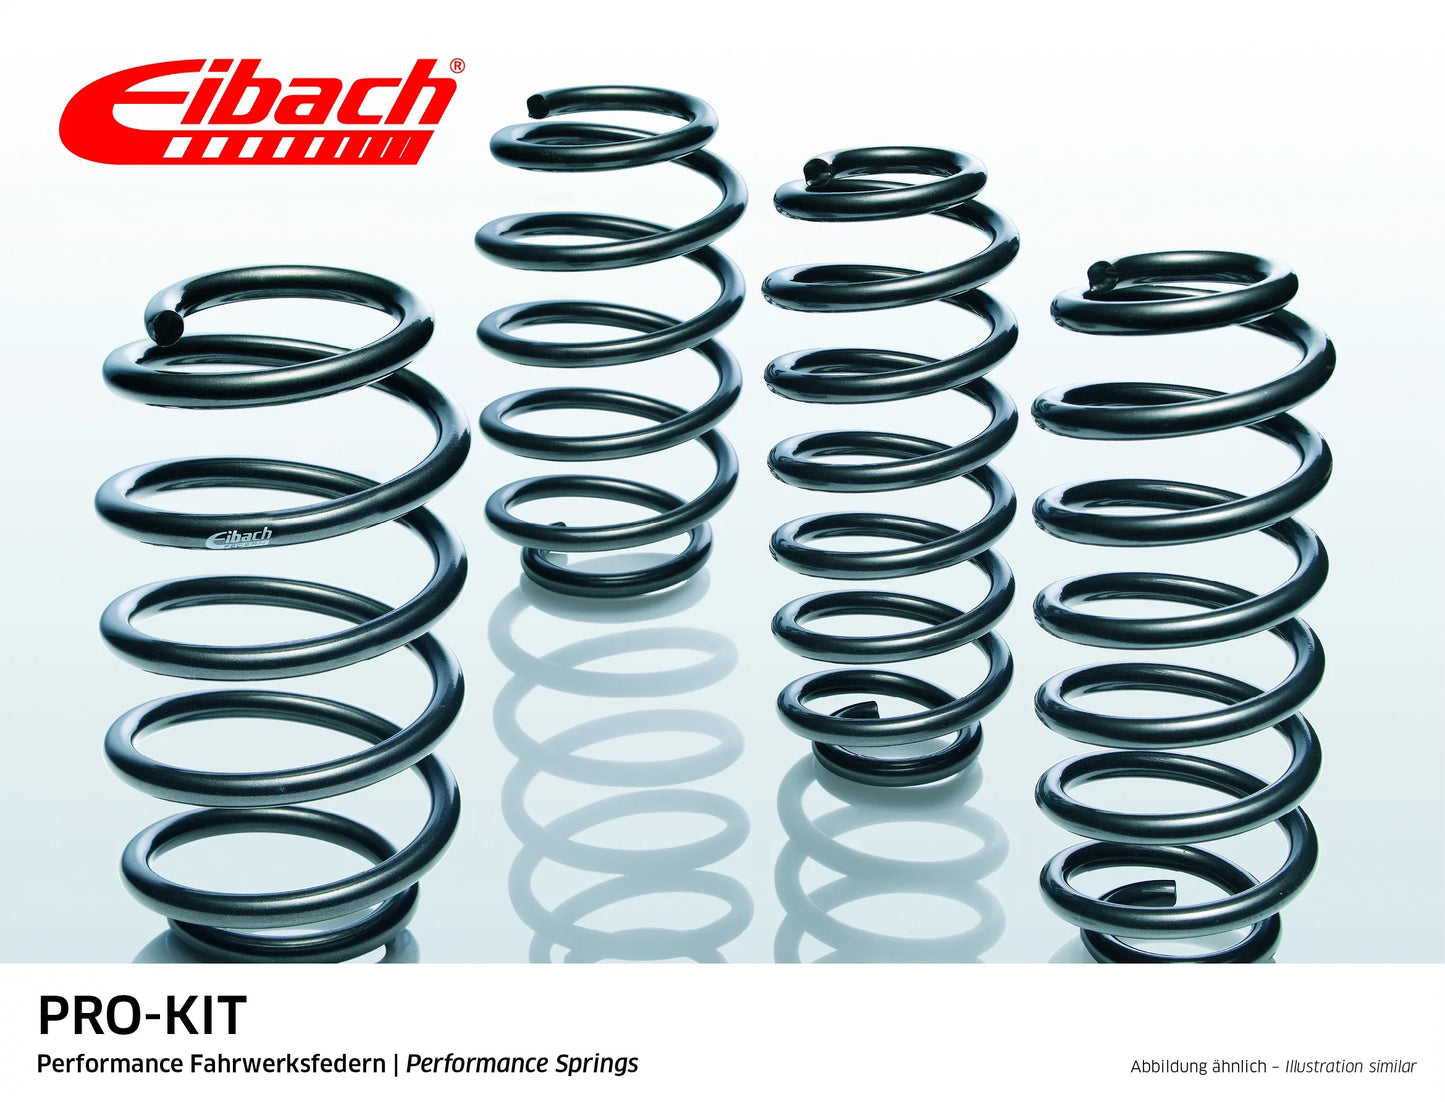 Eibach Pro-Kit Lowering Springs (E2067-140) at £216.15